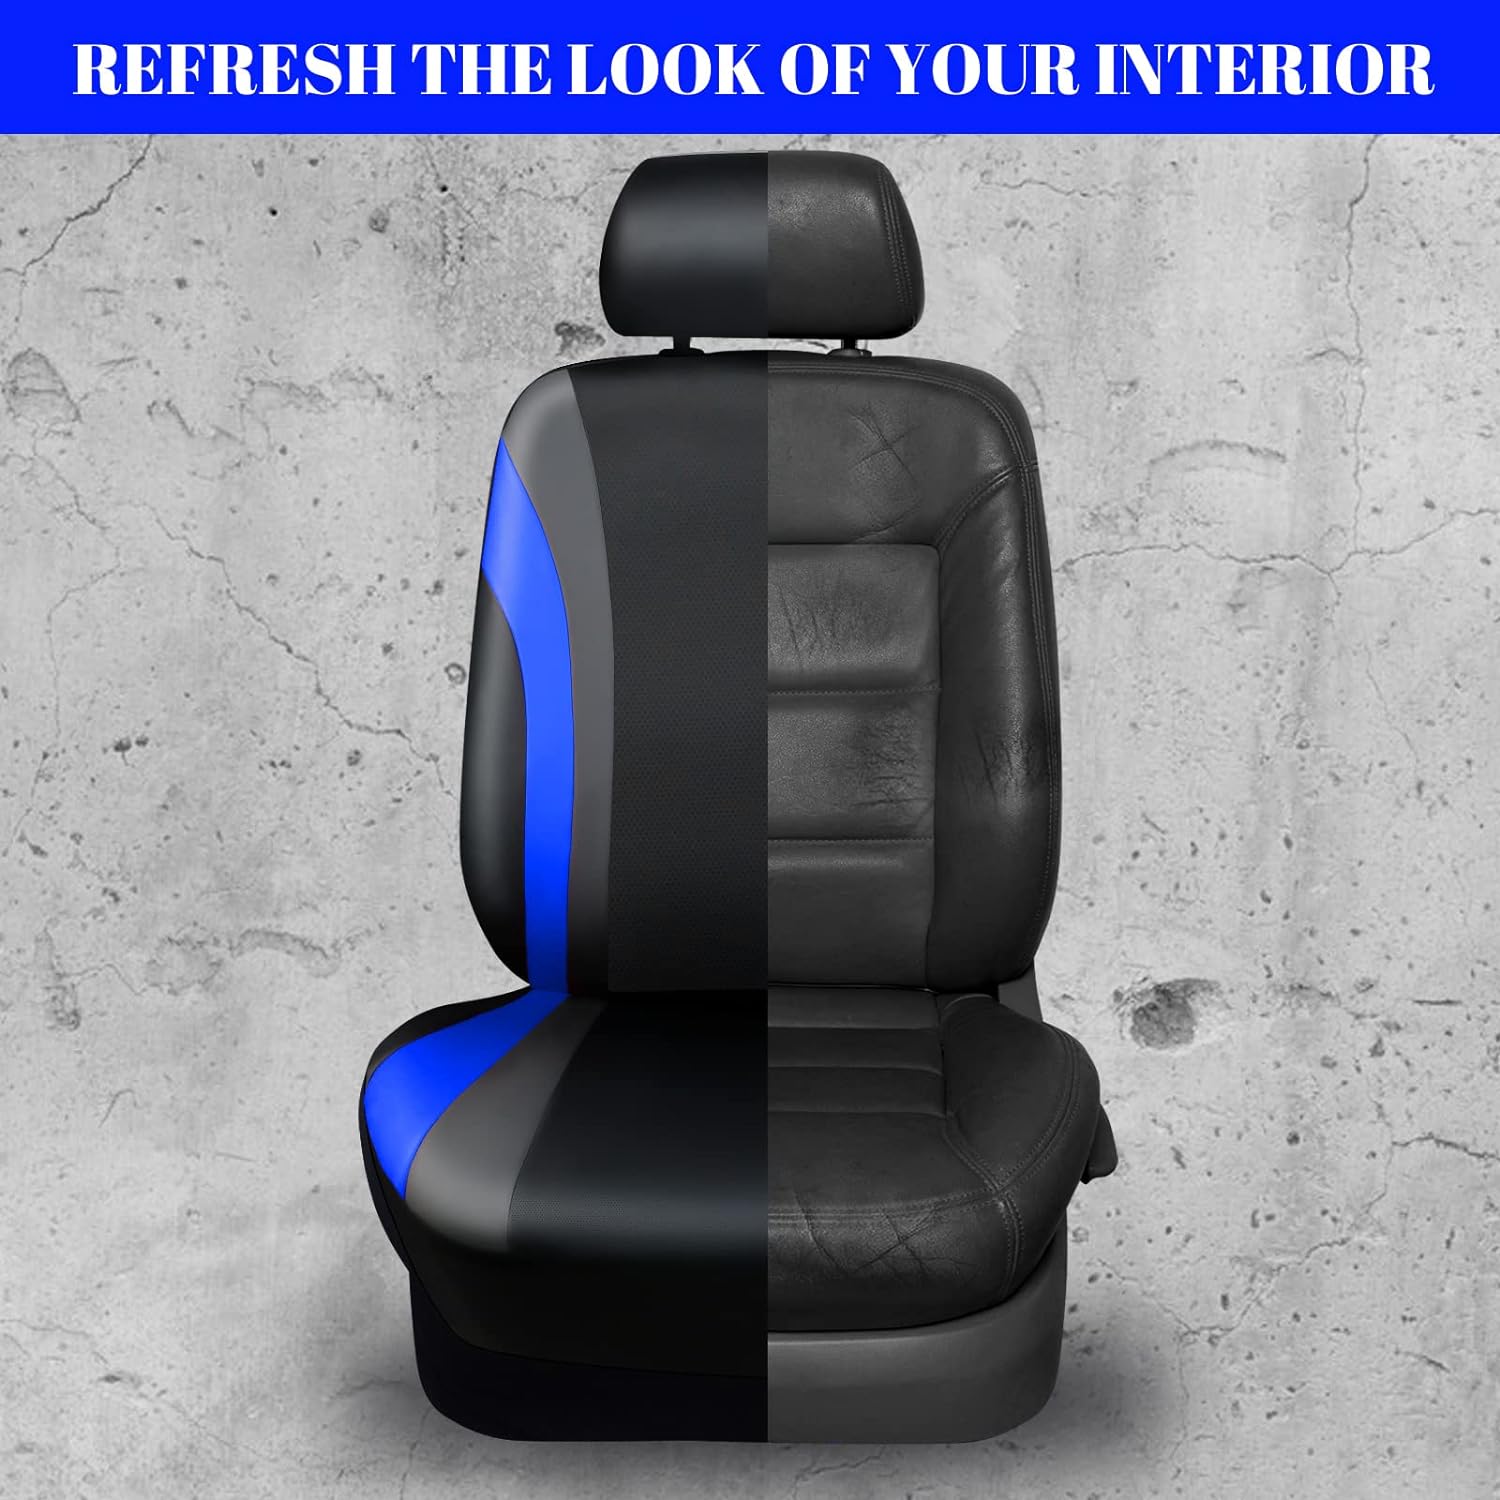 CAR PASS Line Rider Leather Car Seat Cover and Steering Wheel Cover Combo Fits for 95% Truck, SUV, Sedan. 14.5-15 Inch Anti-Slip Desgin. 3 Zipper Bench. (Black and Blue)